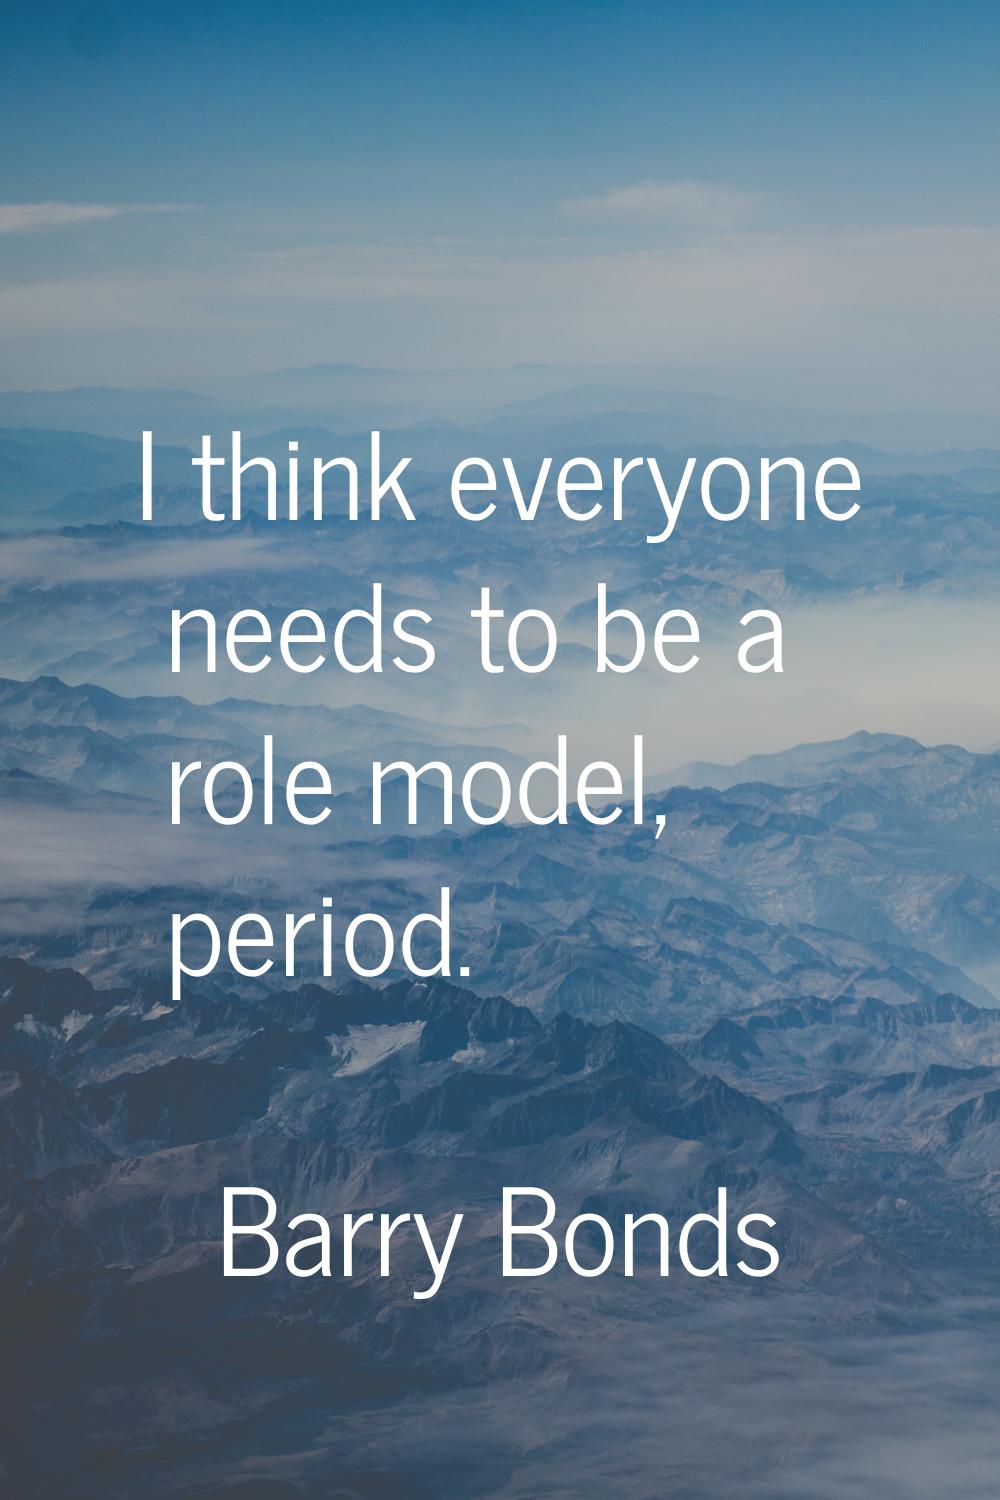 I think everyone needs to be a role model, period.